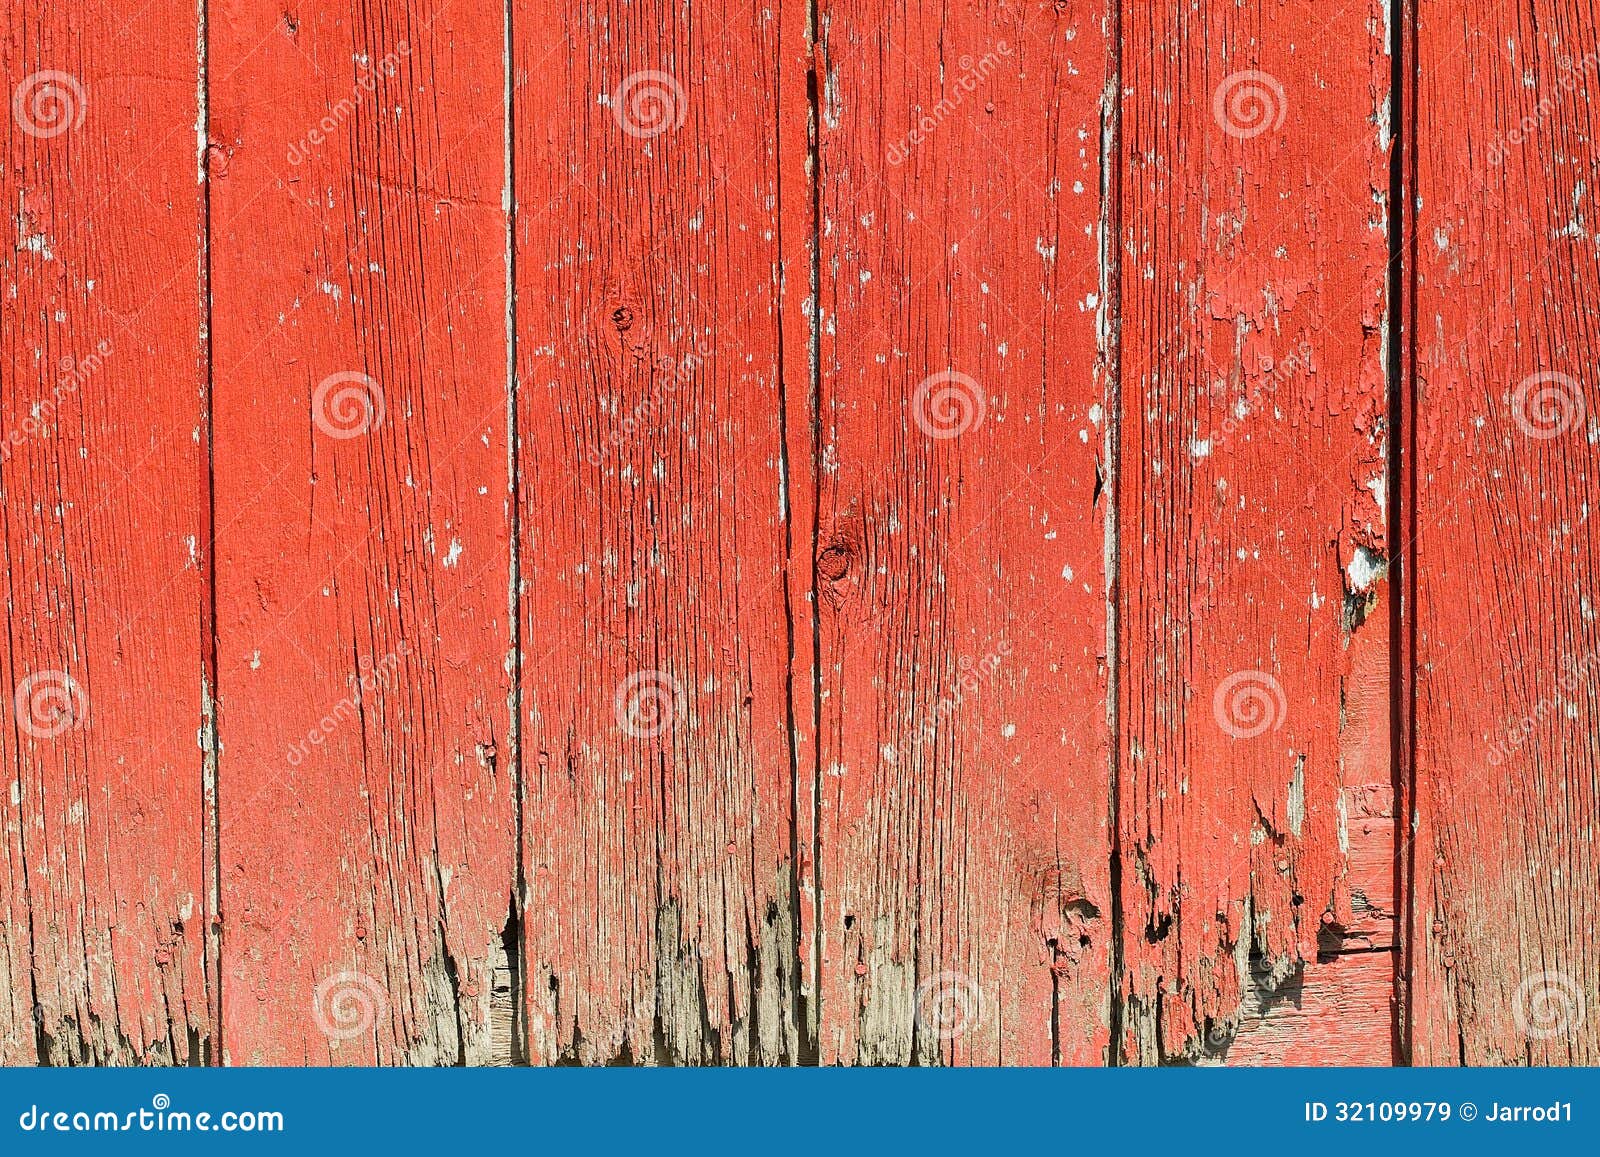 Rustic Red Barn Wood Background Hd